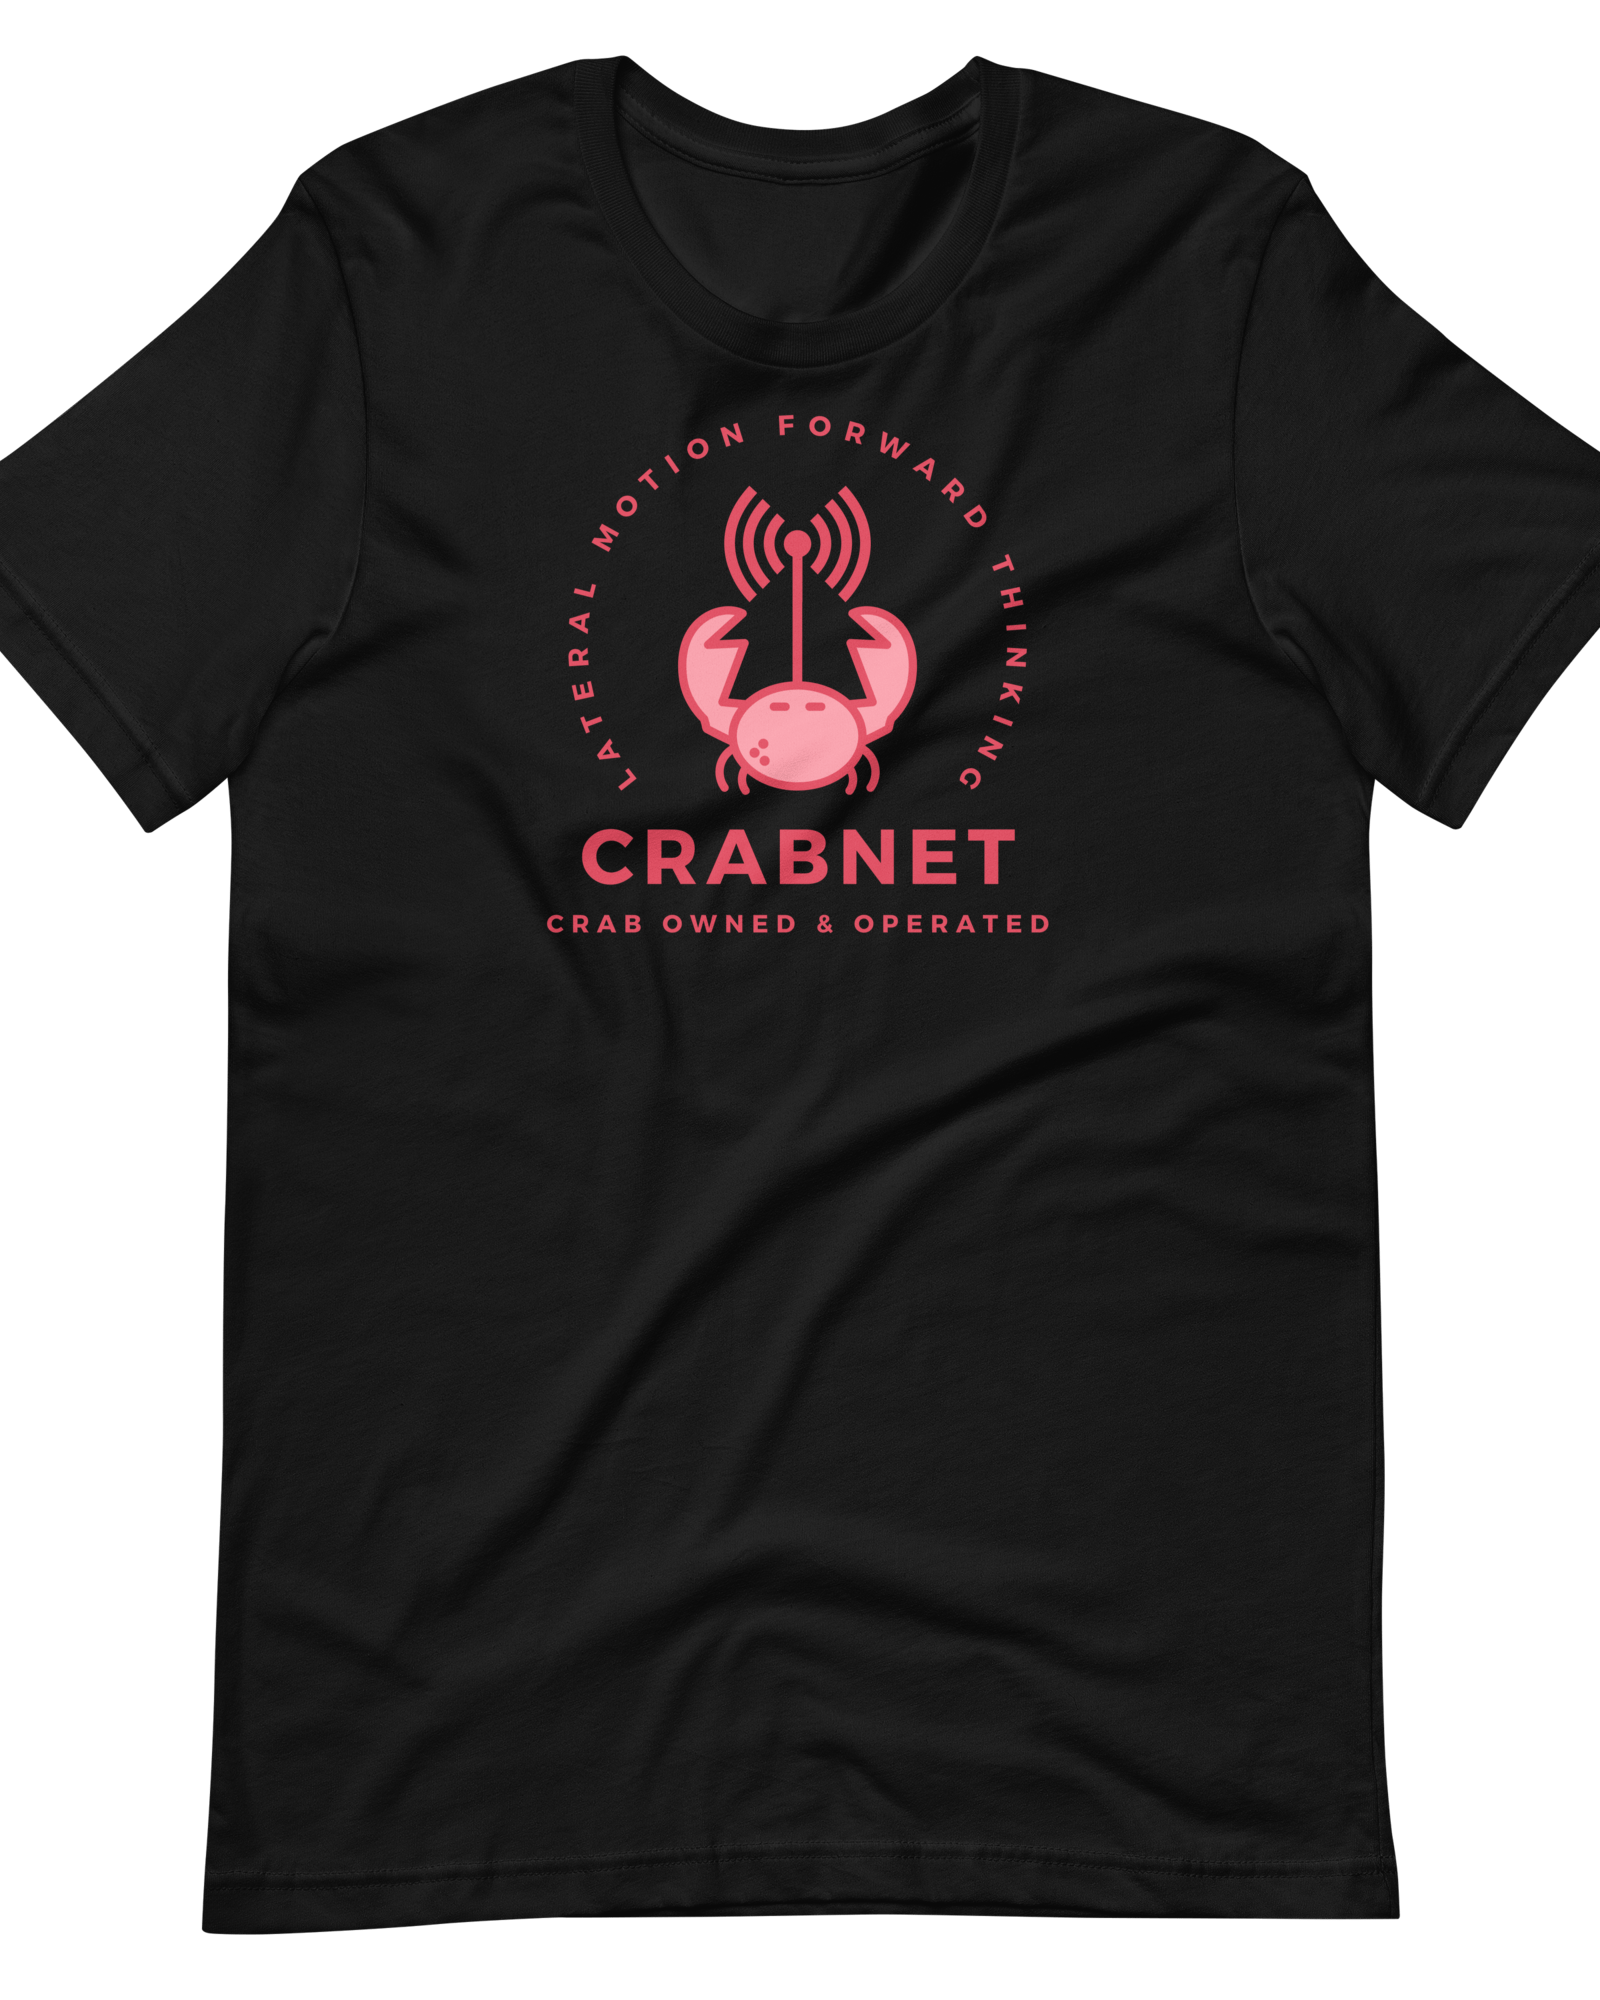 Crabnet T-shirt | Lateral Motion Forward Thinking | Unisex Fit Black / S Shirts & Tops Jolly & Goode